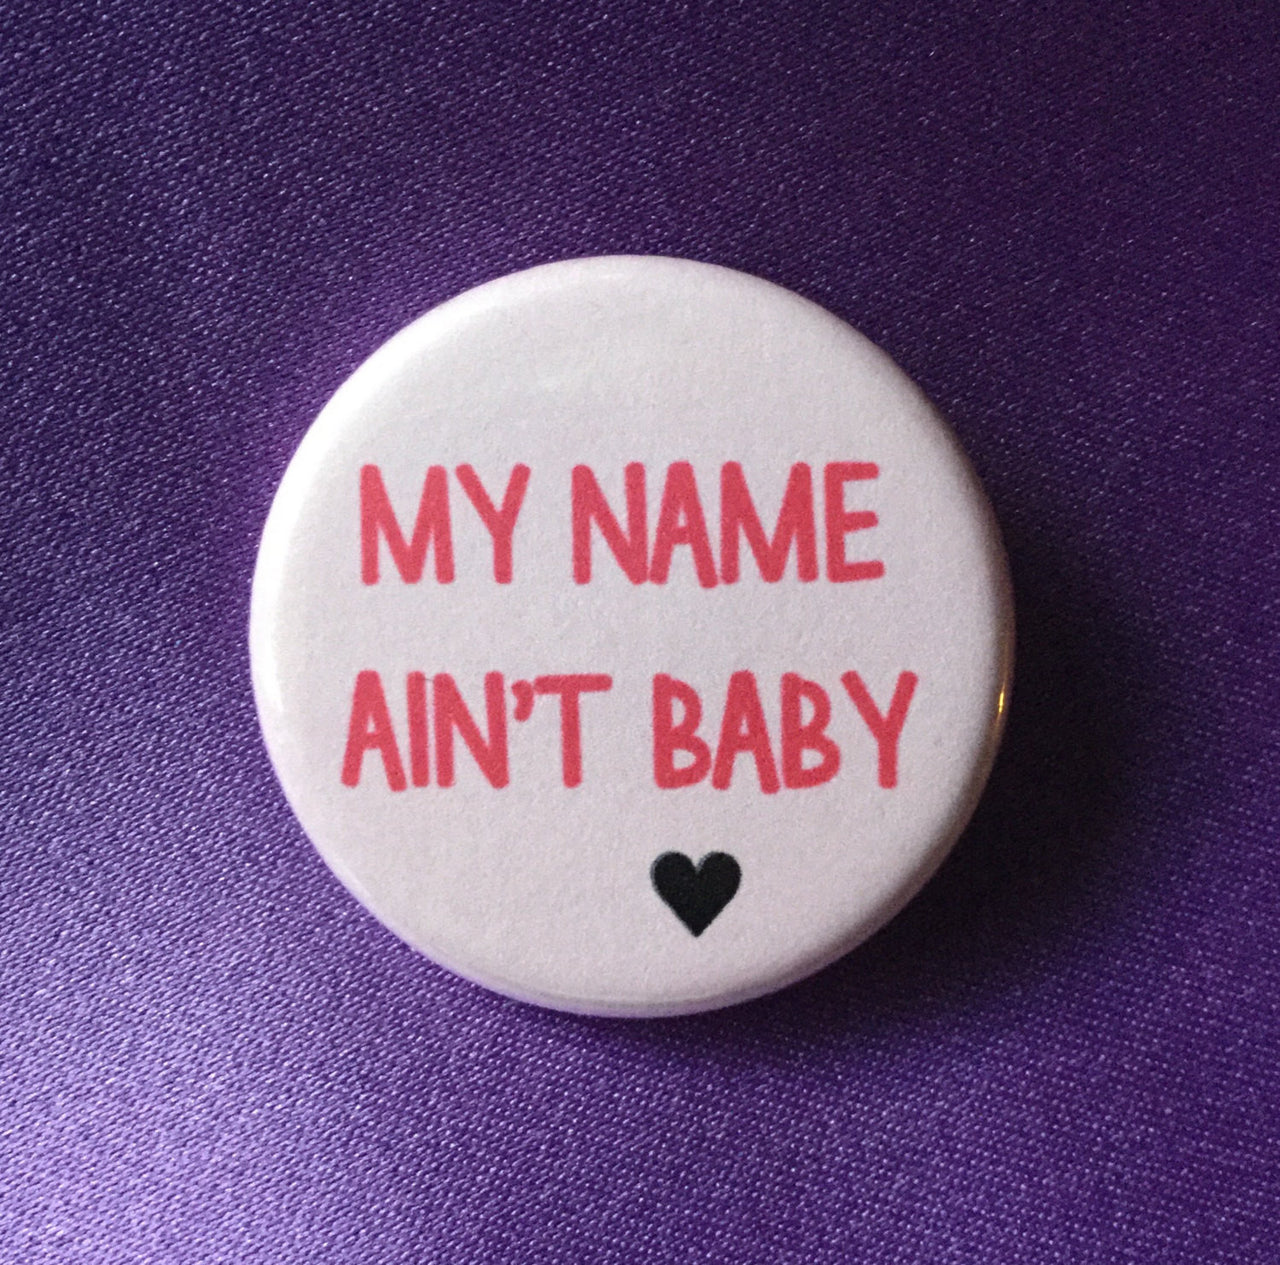 My name ain't baby - Radical Buttons